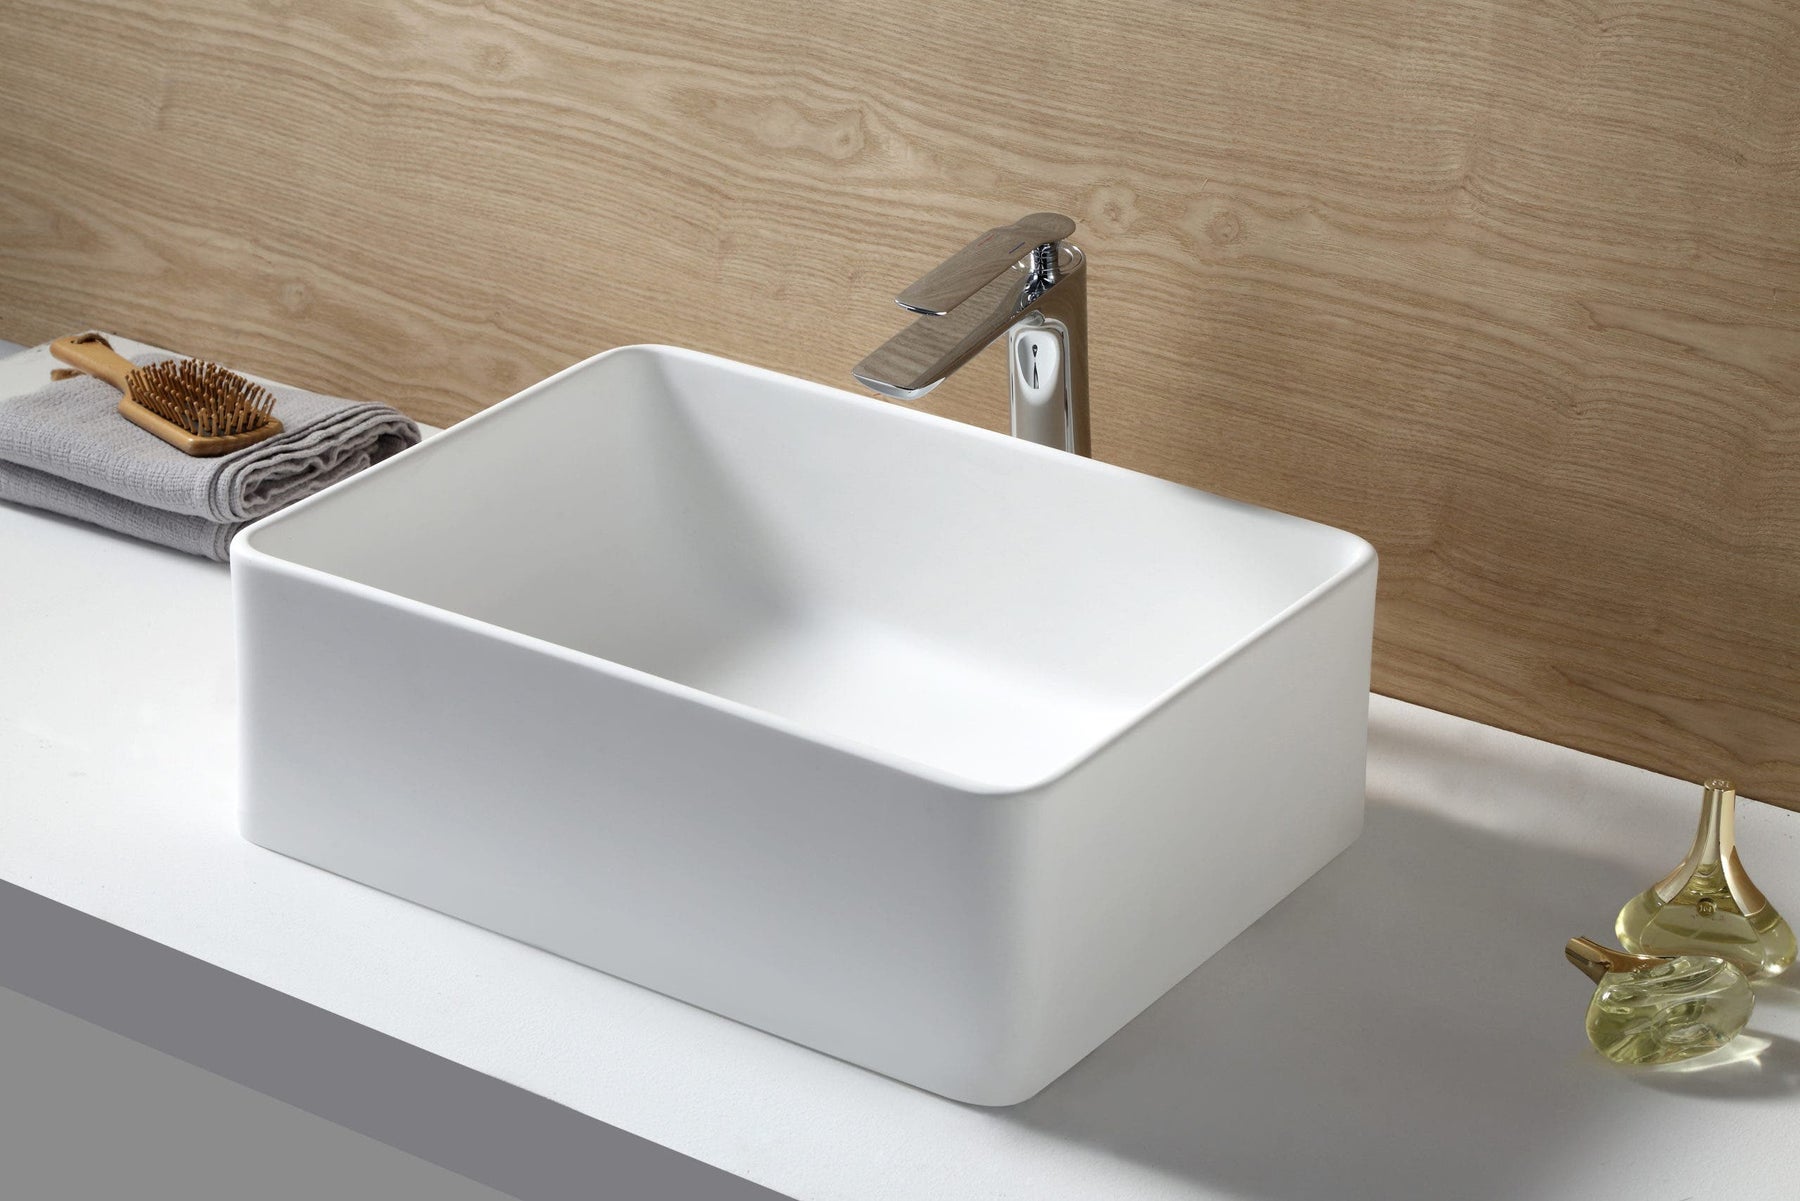 Enliven your Bathroom’s Modern Look with the Fauceture White Stone Vessel Sink, EVA20156